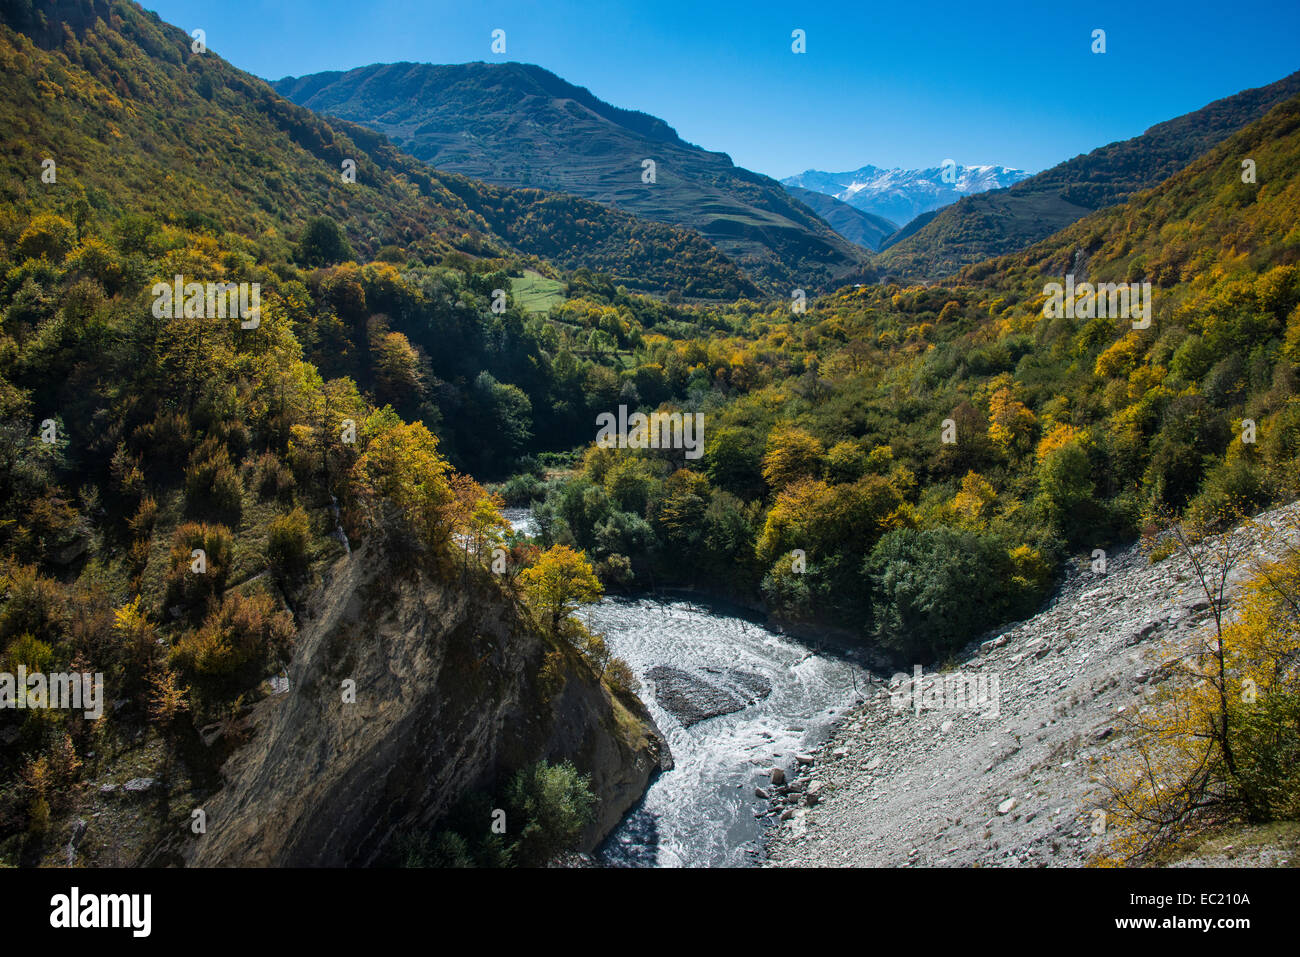 The caucasian mountains in fall with the Argun river, Chechnya, Caucasus, Russia Stock Photo